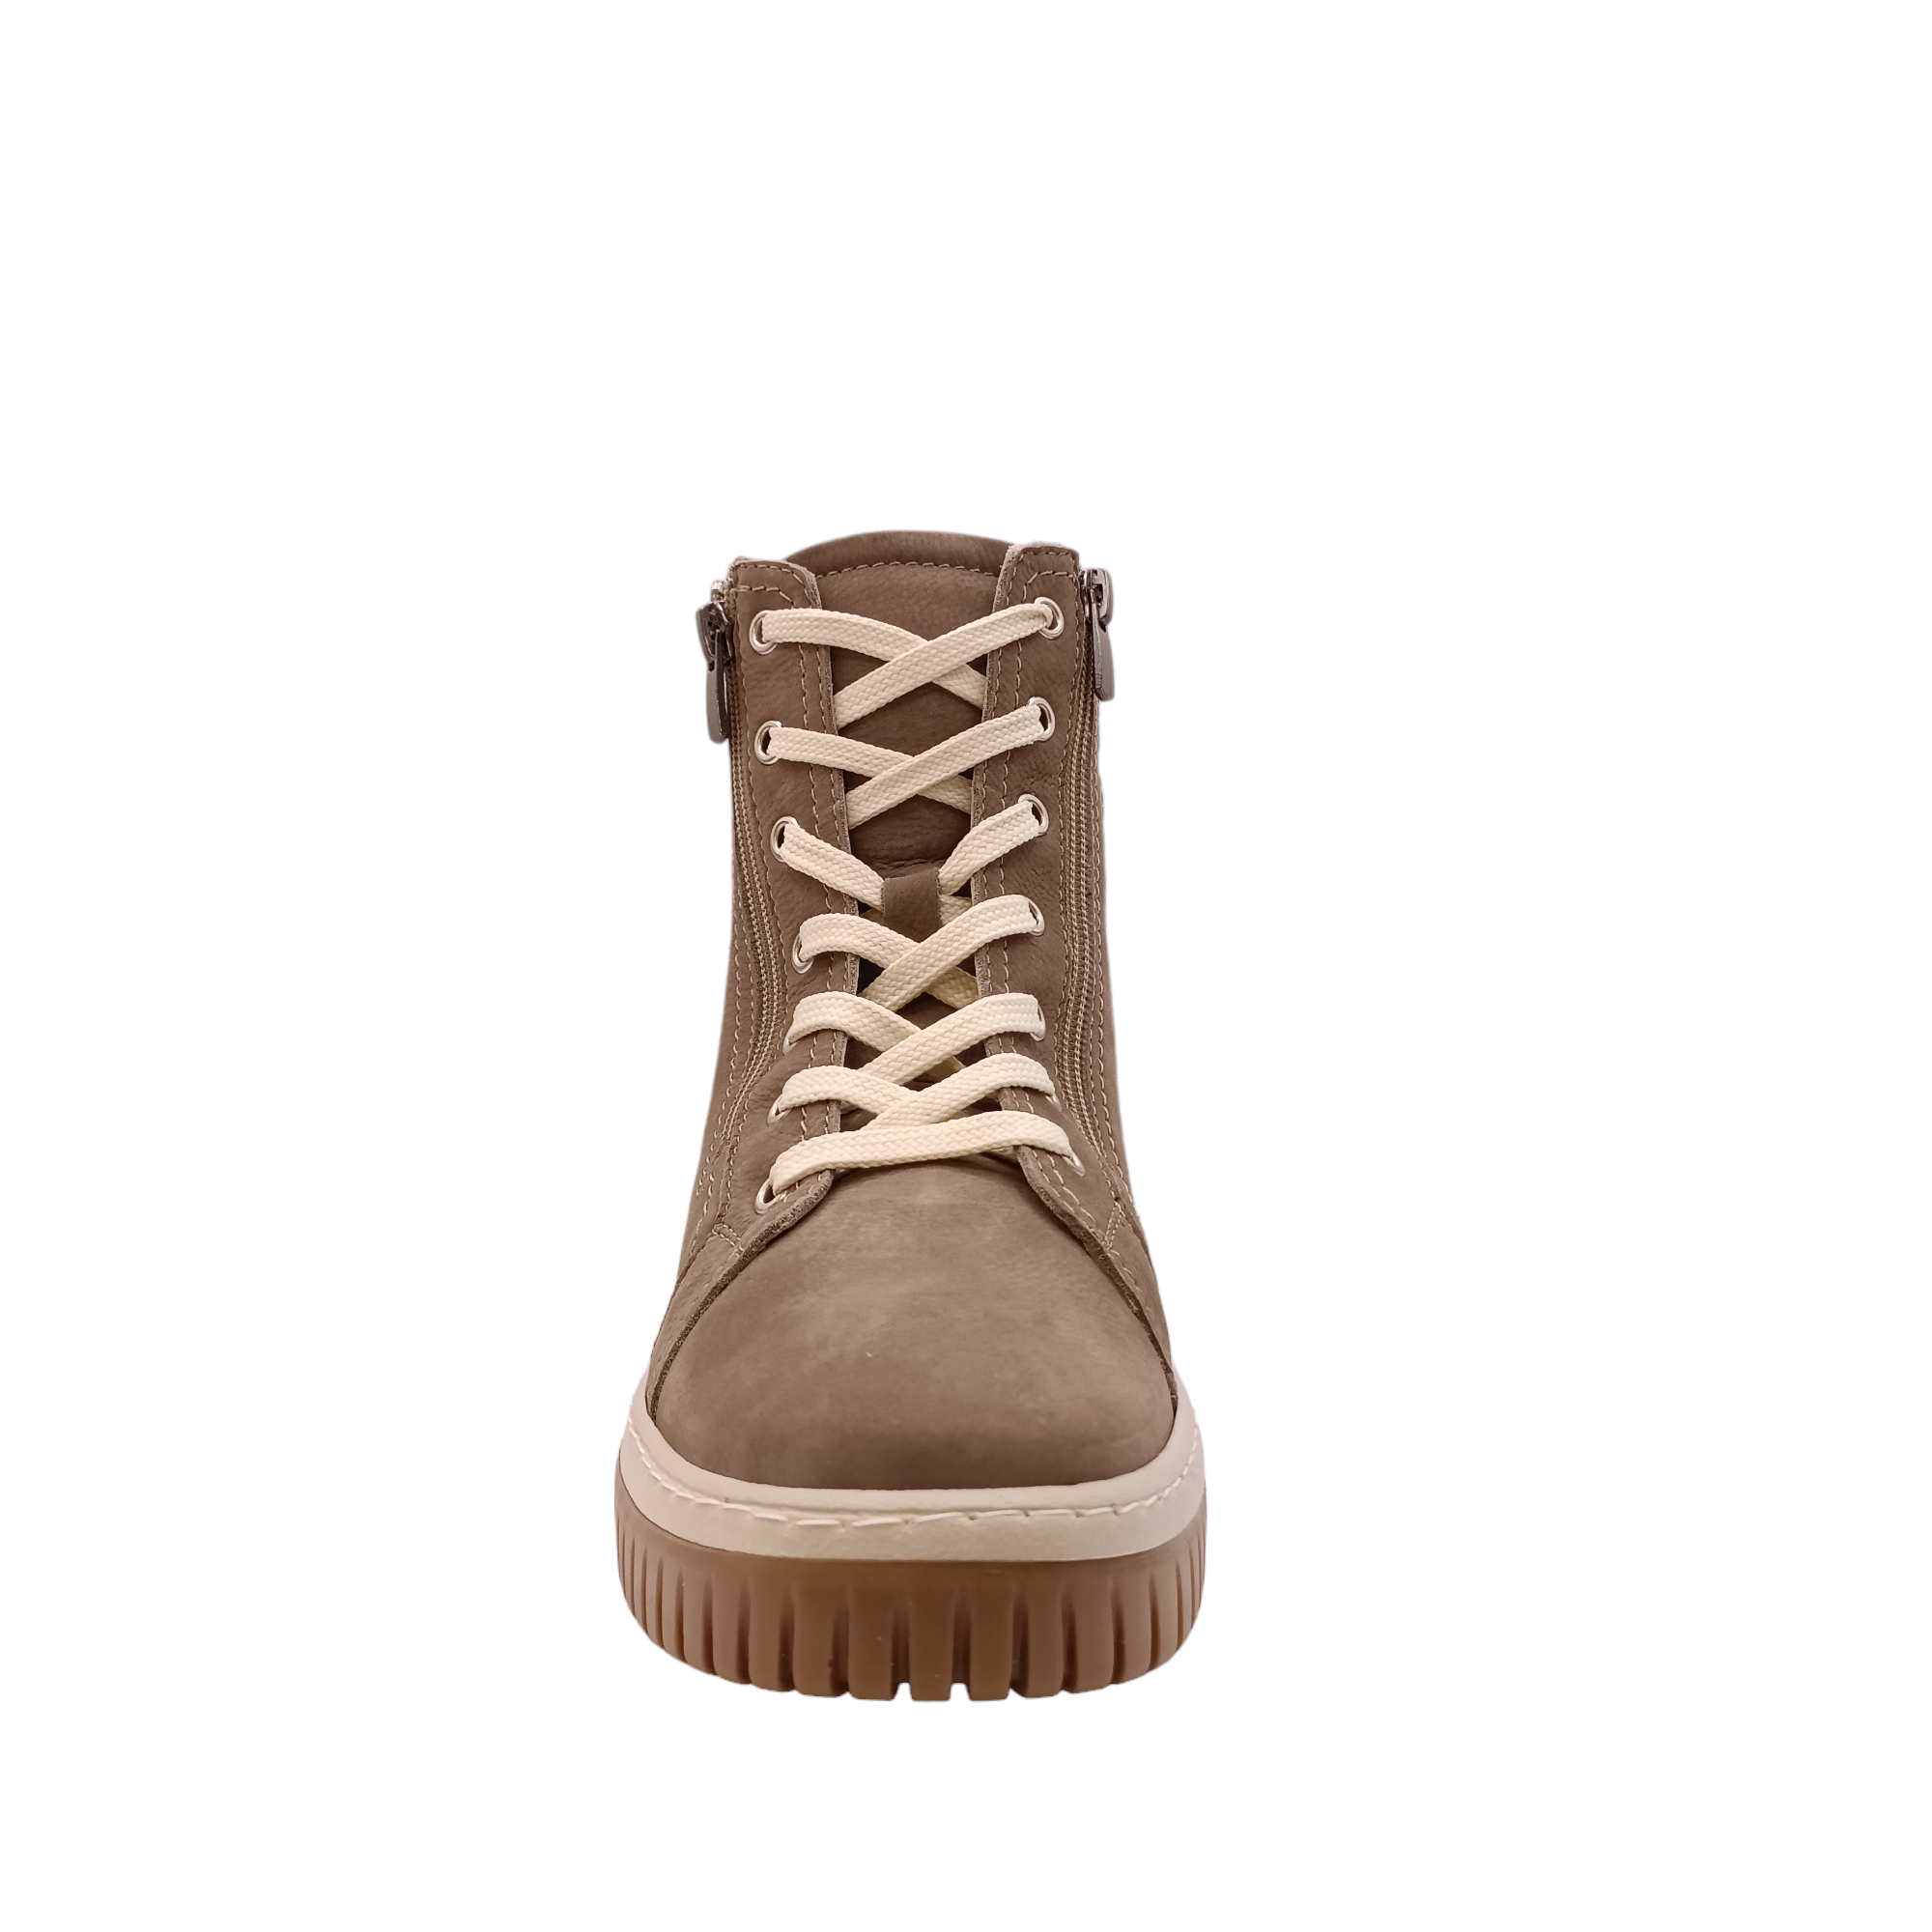 front on view of the boot Petra from Cabello. Soft Turkish taupe coloured leather boot with side zip and light coloured sole and laces. Padded ankle with ruggered grip. Shop Womens Boots Online and In-store with shoe&amp;me Mount Maunganui Tauranga NZ.